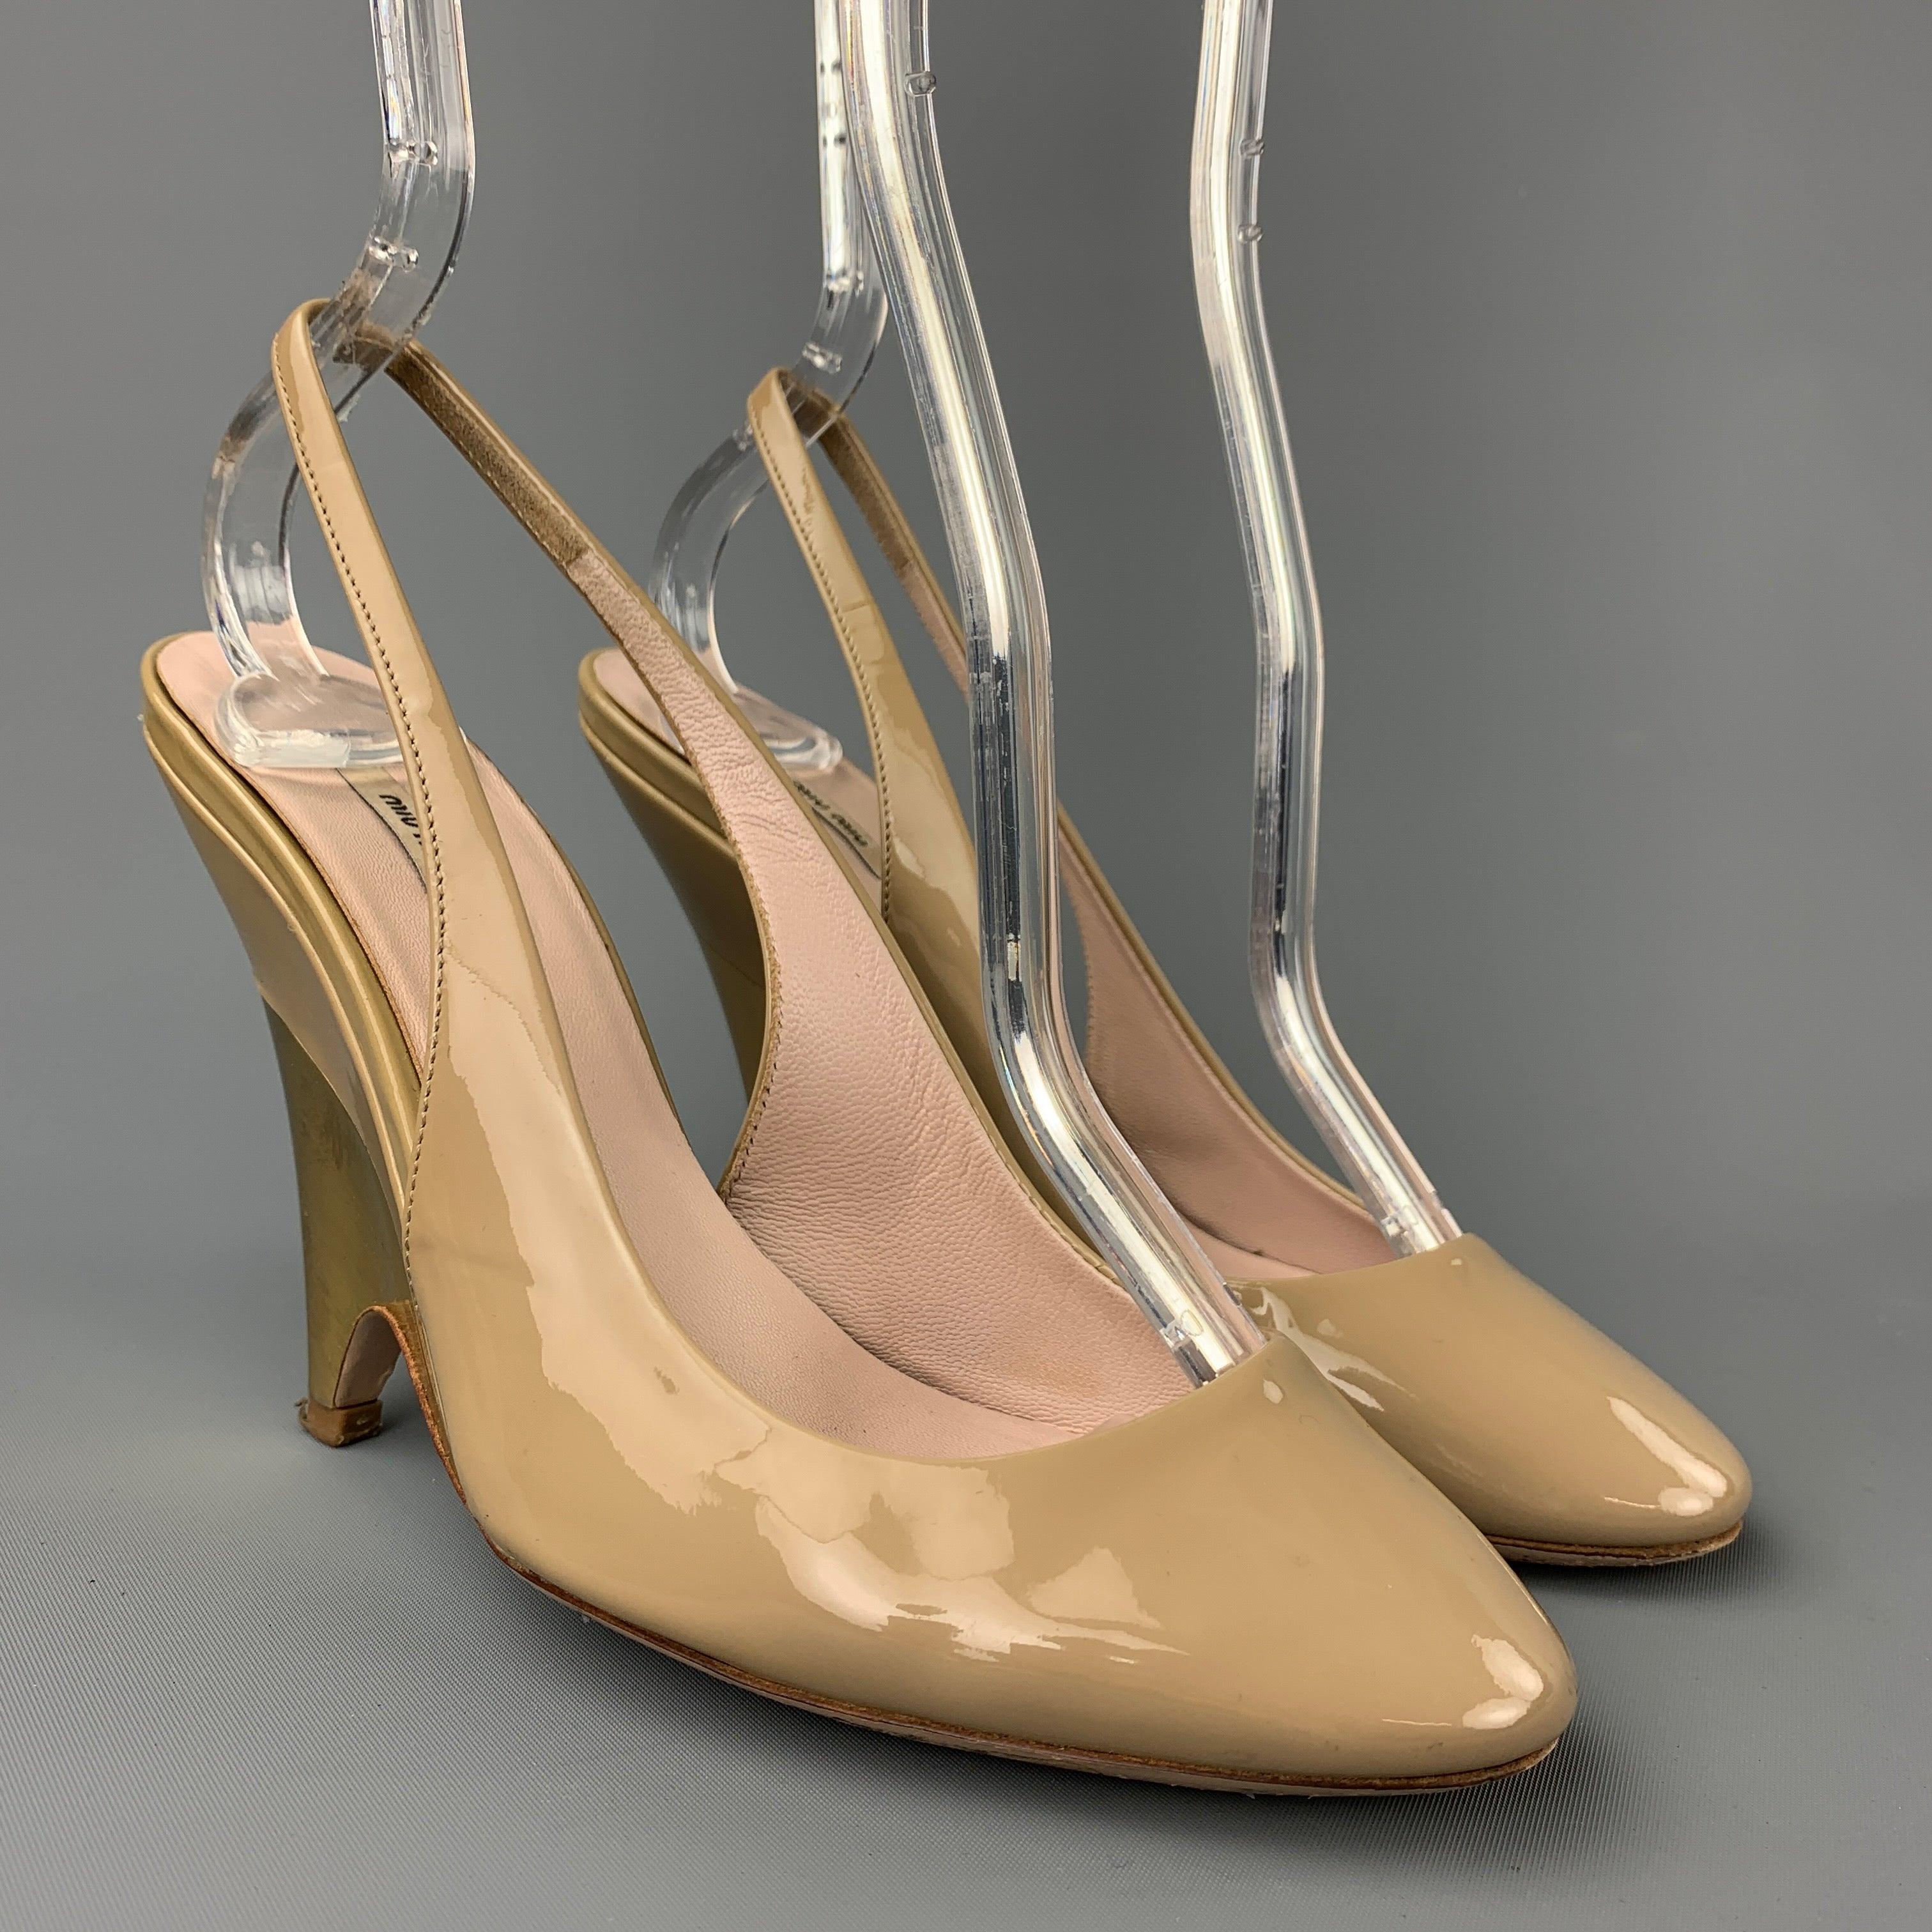 MIU MIU pumps comes in beige patent leather with a gold tone heel featuring a slingback. Made in Italy.
Good
Pre-Owned Condition. 

Marked:   EU 35.5 

Measurements: 
  Heel:
4 inches  
  
  
 
Reference: 108121
Category: Pumps
More Details
   